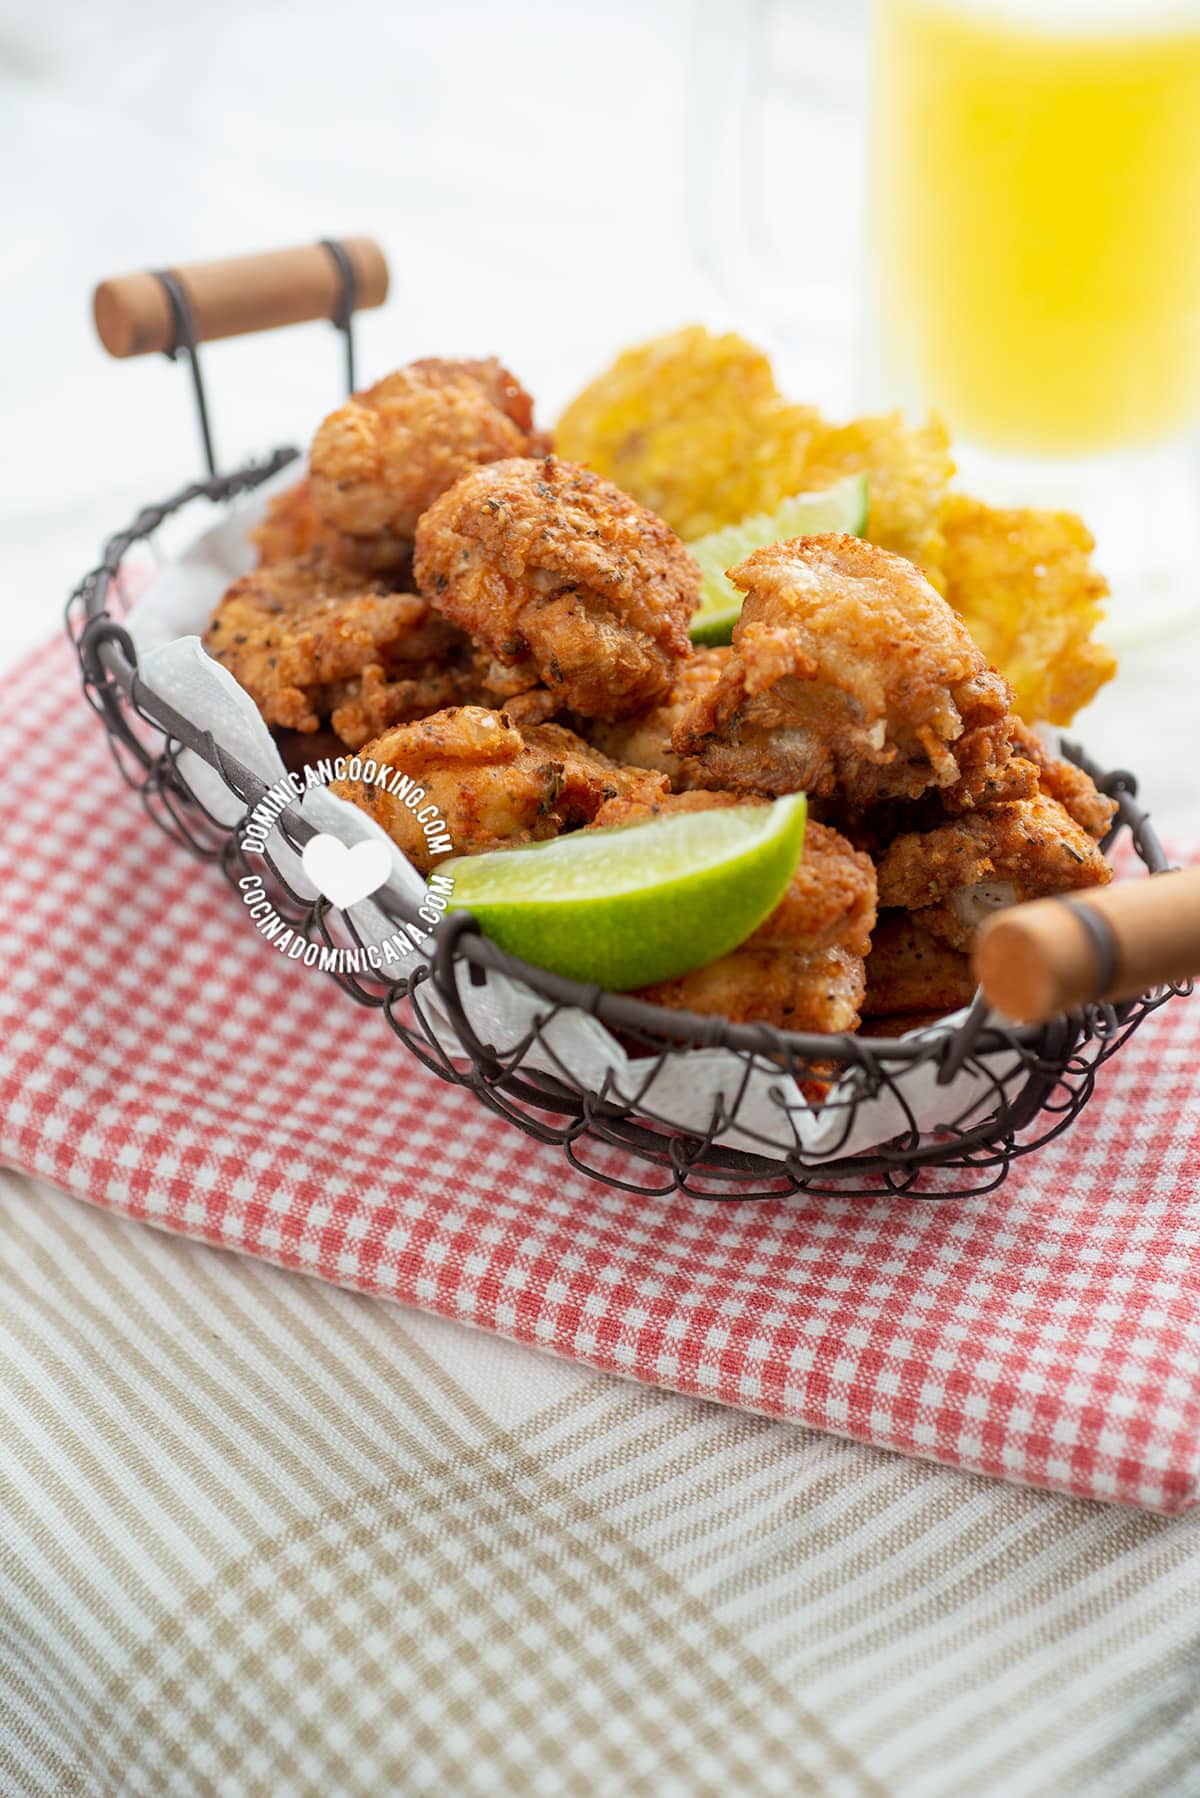 Dominican fried chicken with tostones.